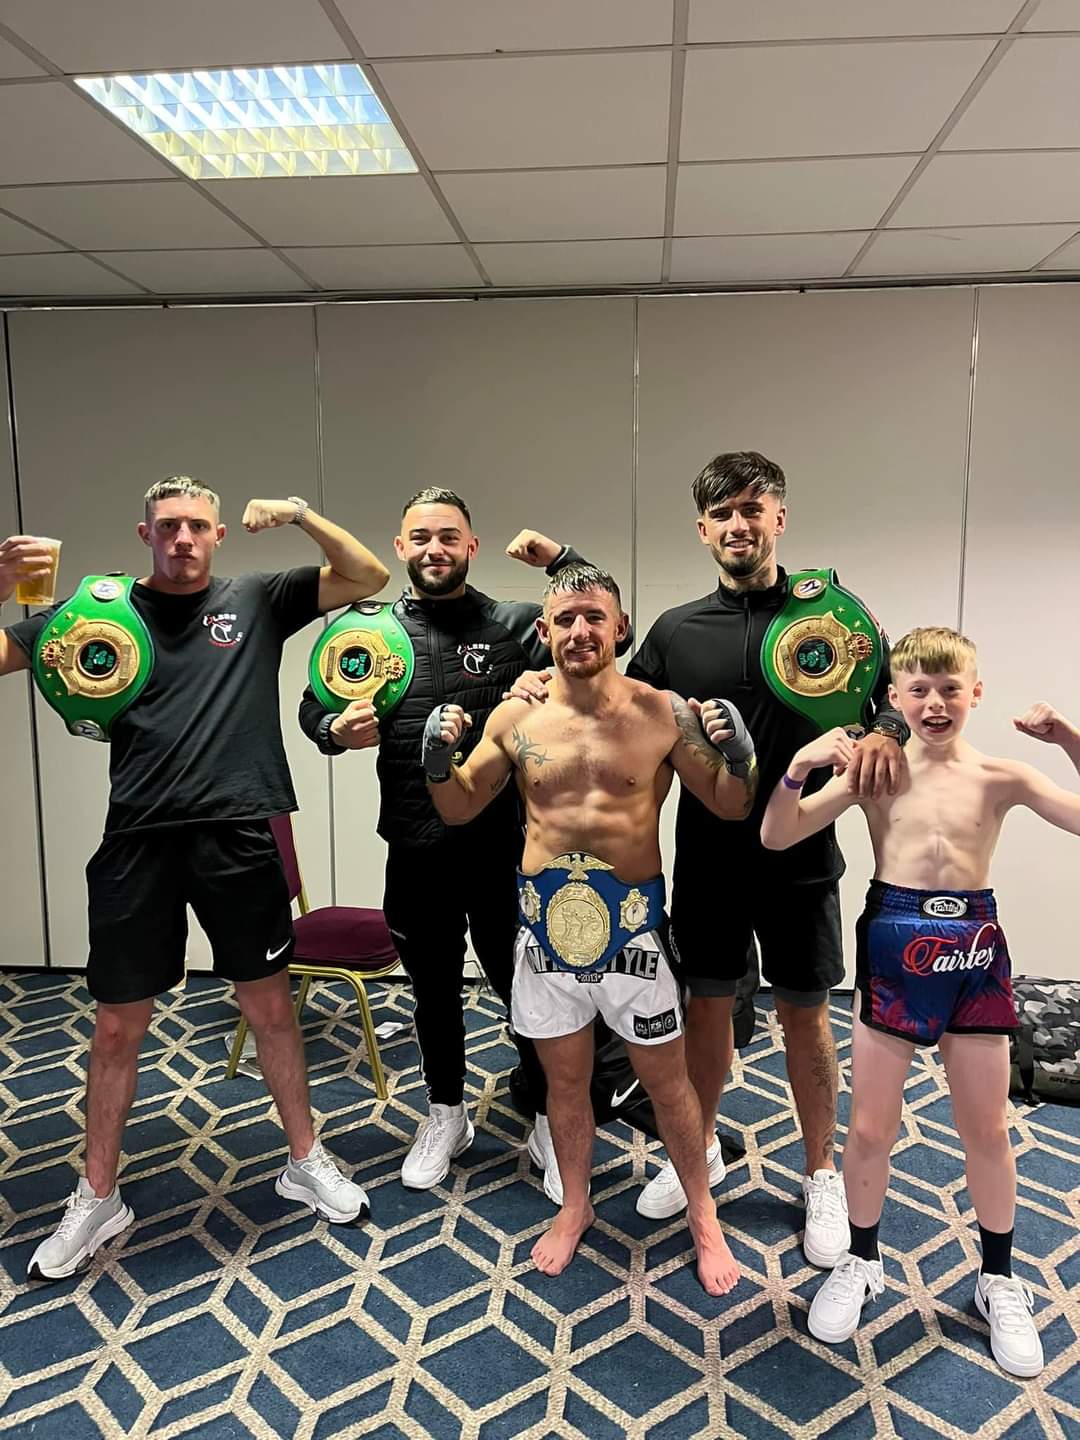 Lafferty earns revenge to claim another belt